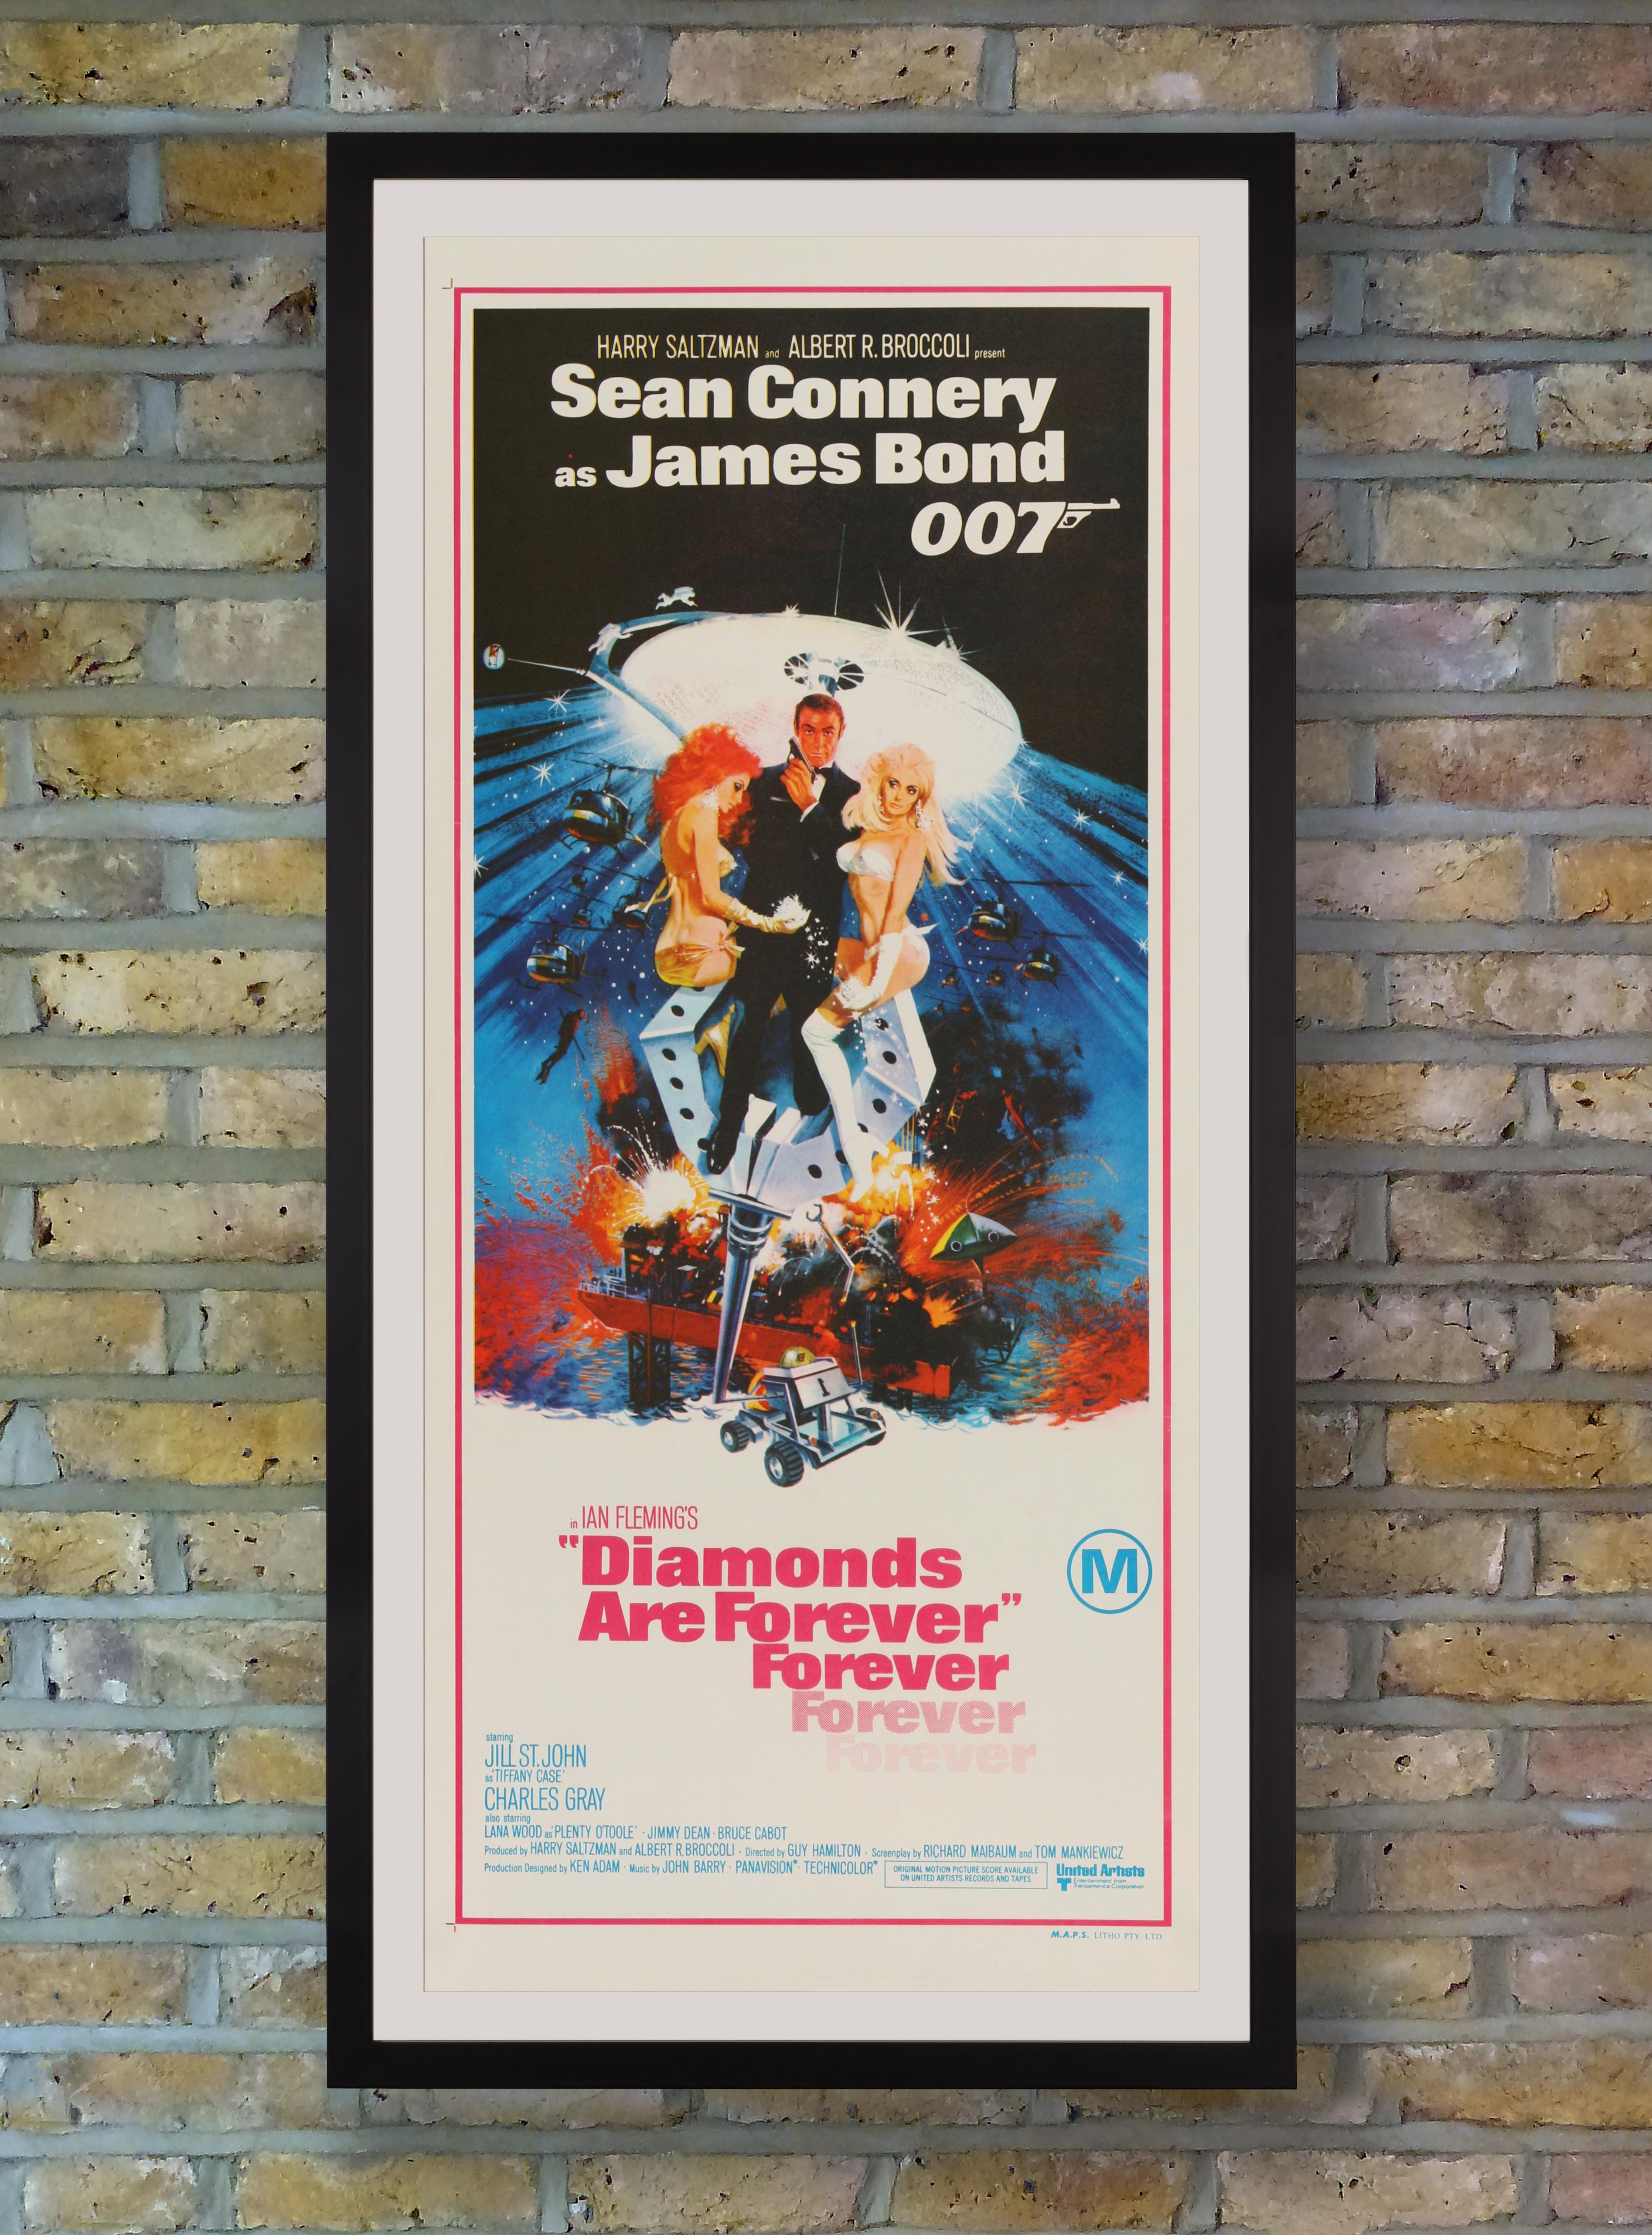 Sean Connery was paid a then record $1.25 million to return as James Bond for EON Production's 'Diamonds Are Forever,' his sixth and final outing as Bond after declining the role in 1969's 'On Her Majesty's Secret Service.' A diamond smuggling